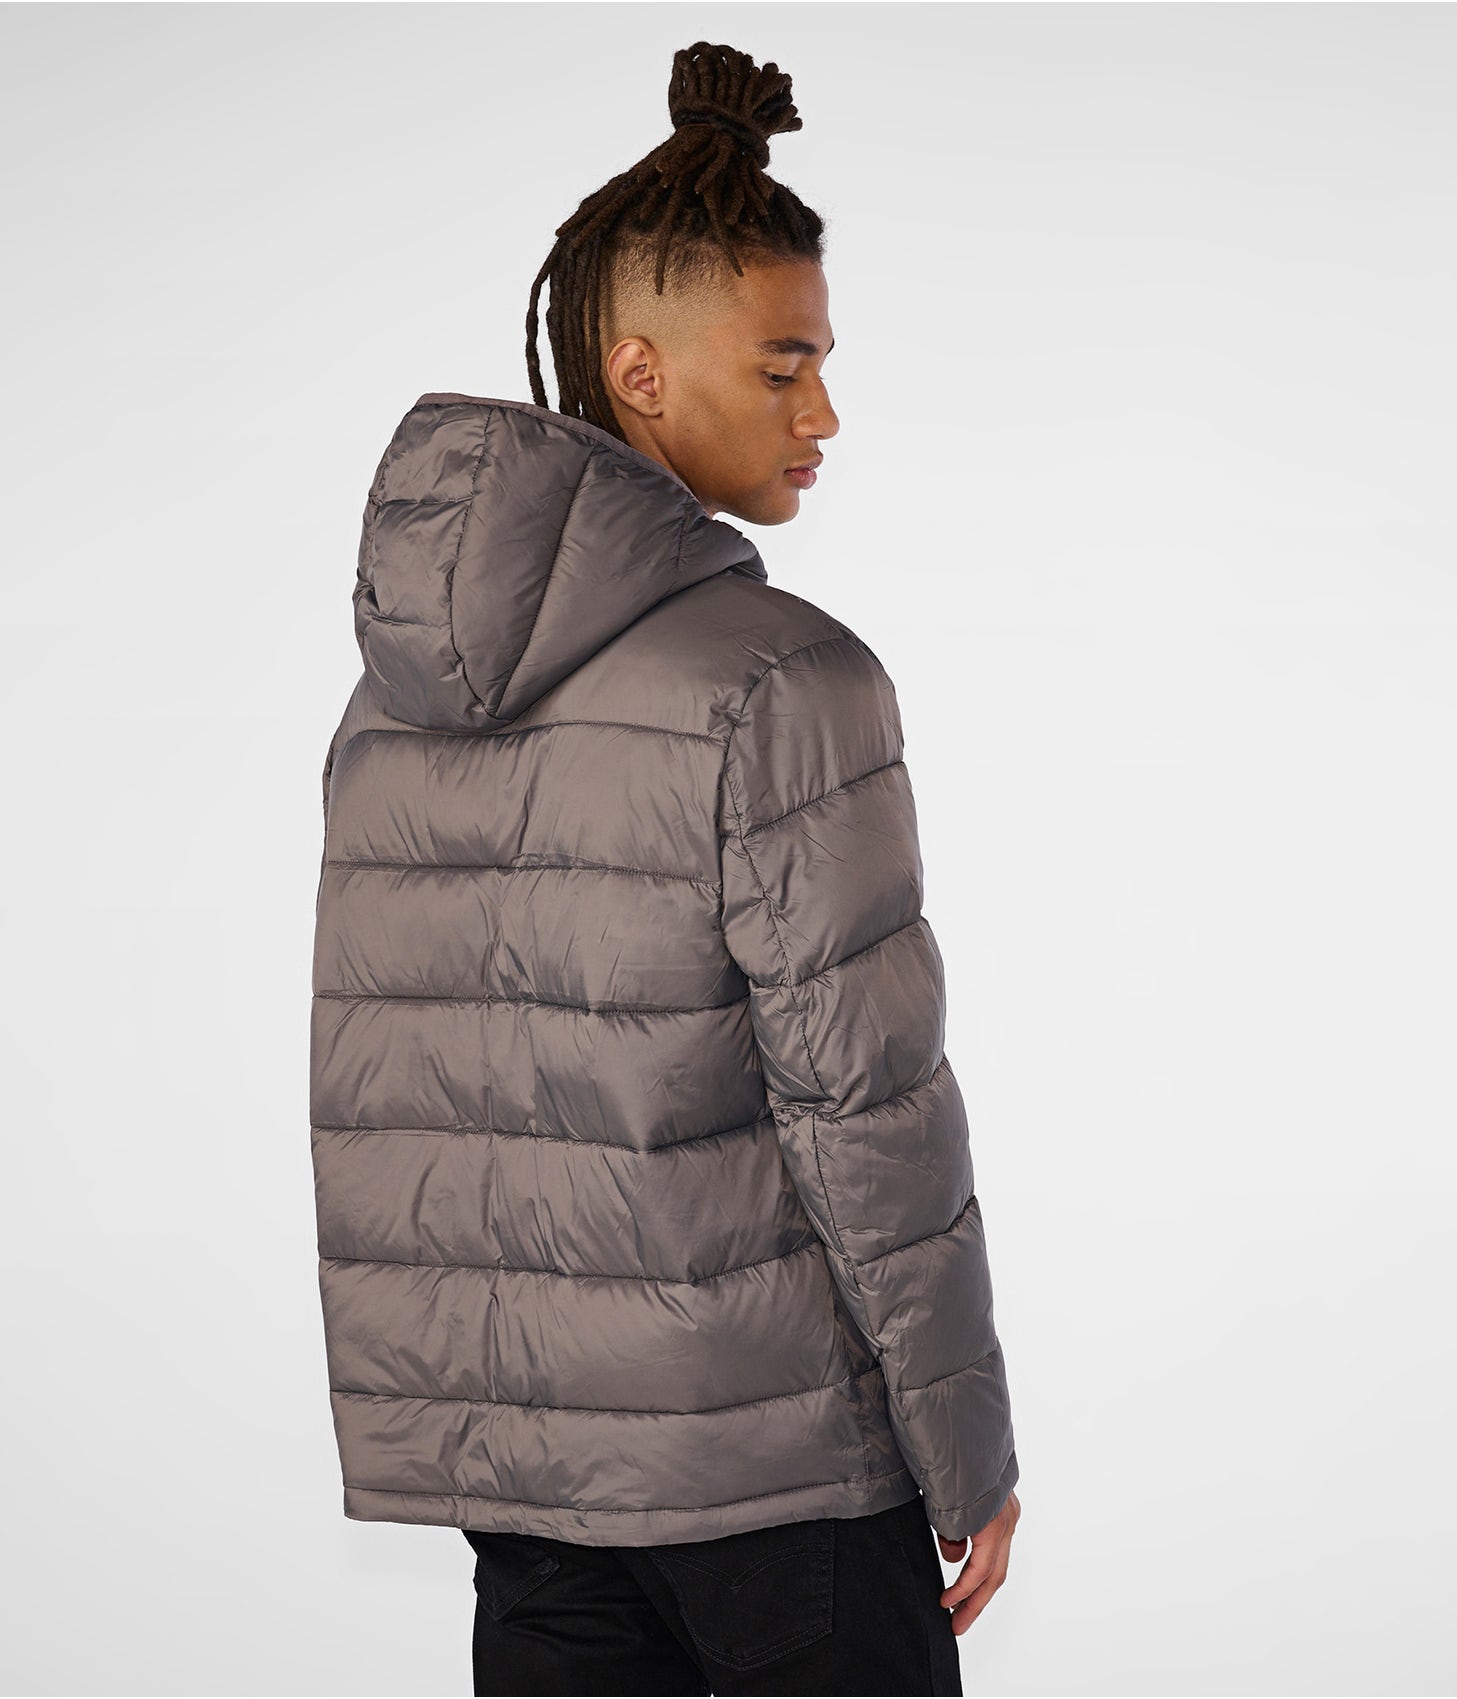 Men's Puffer Jacket In Gray With Removable Hood